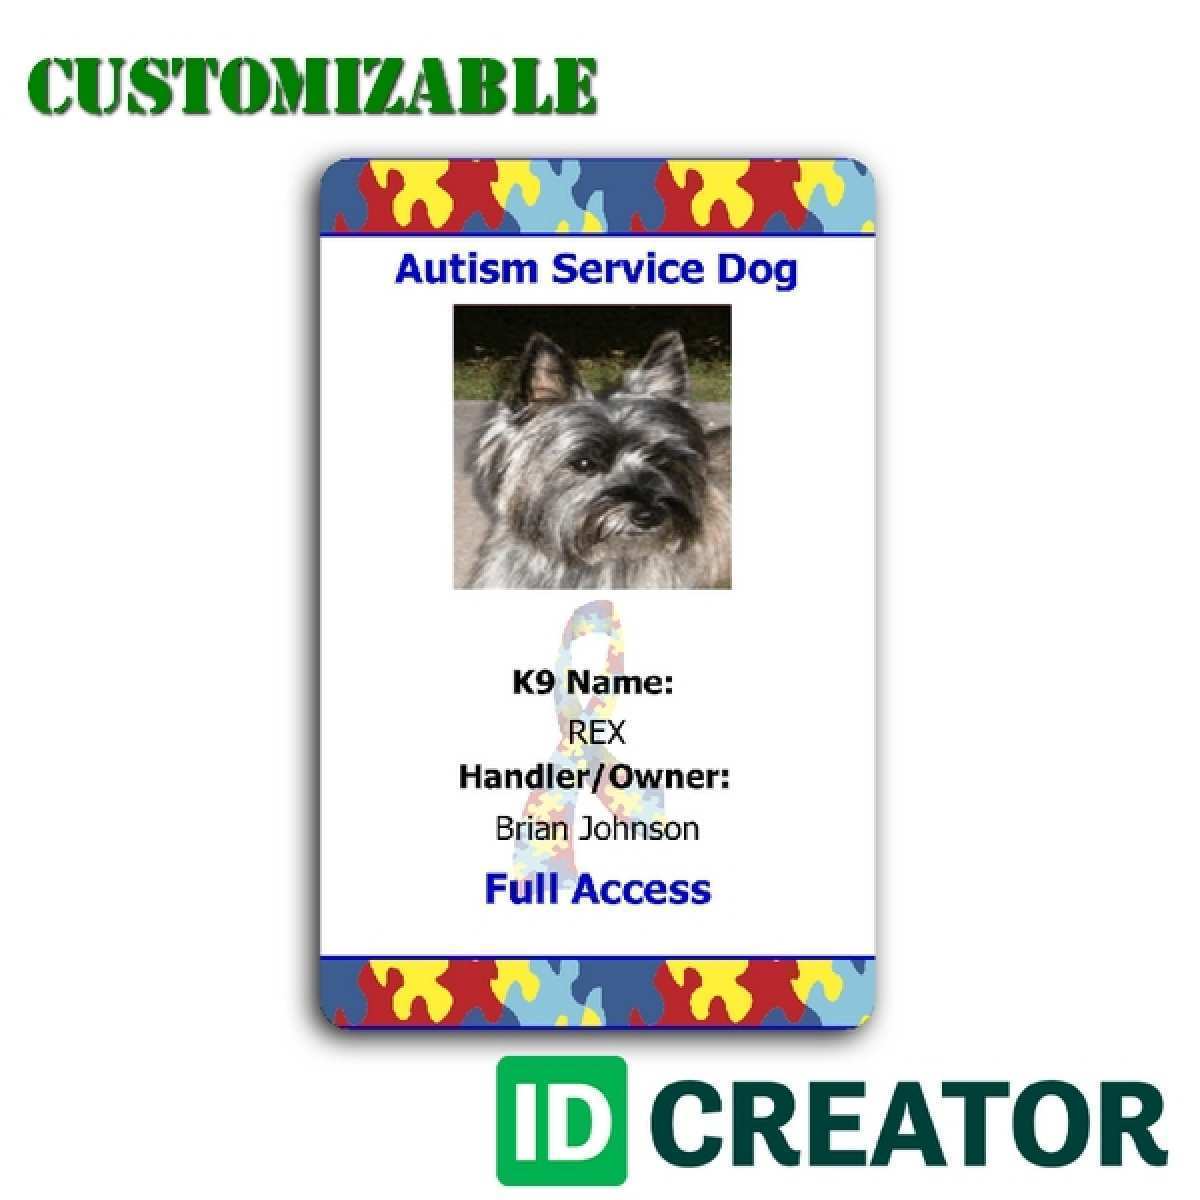 Service Dog Id Card Template Free Download from legaldbol.com